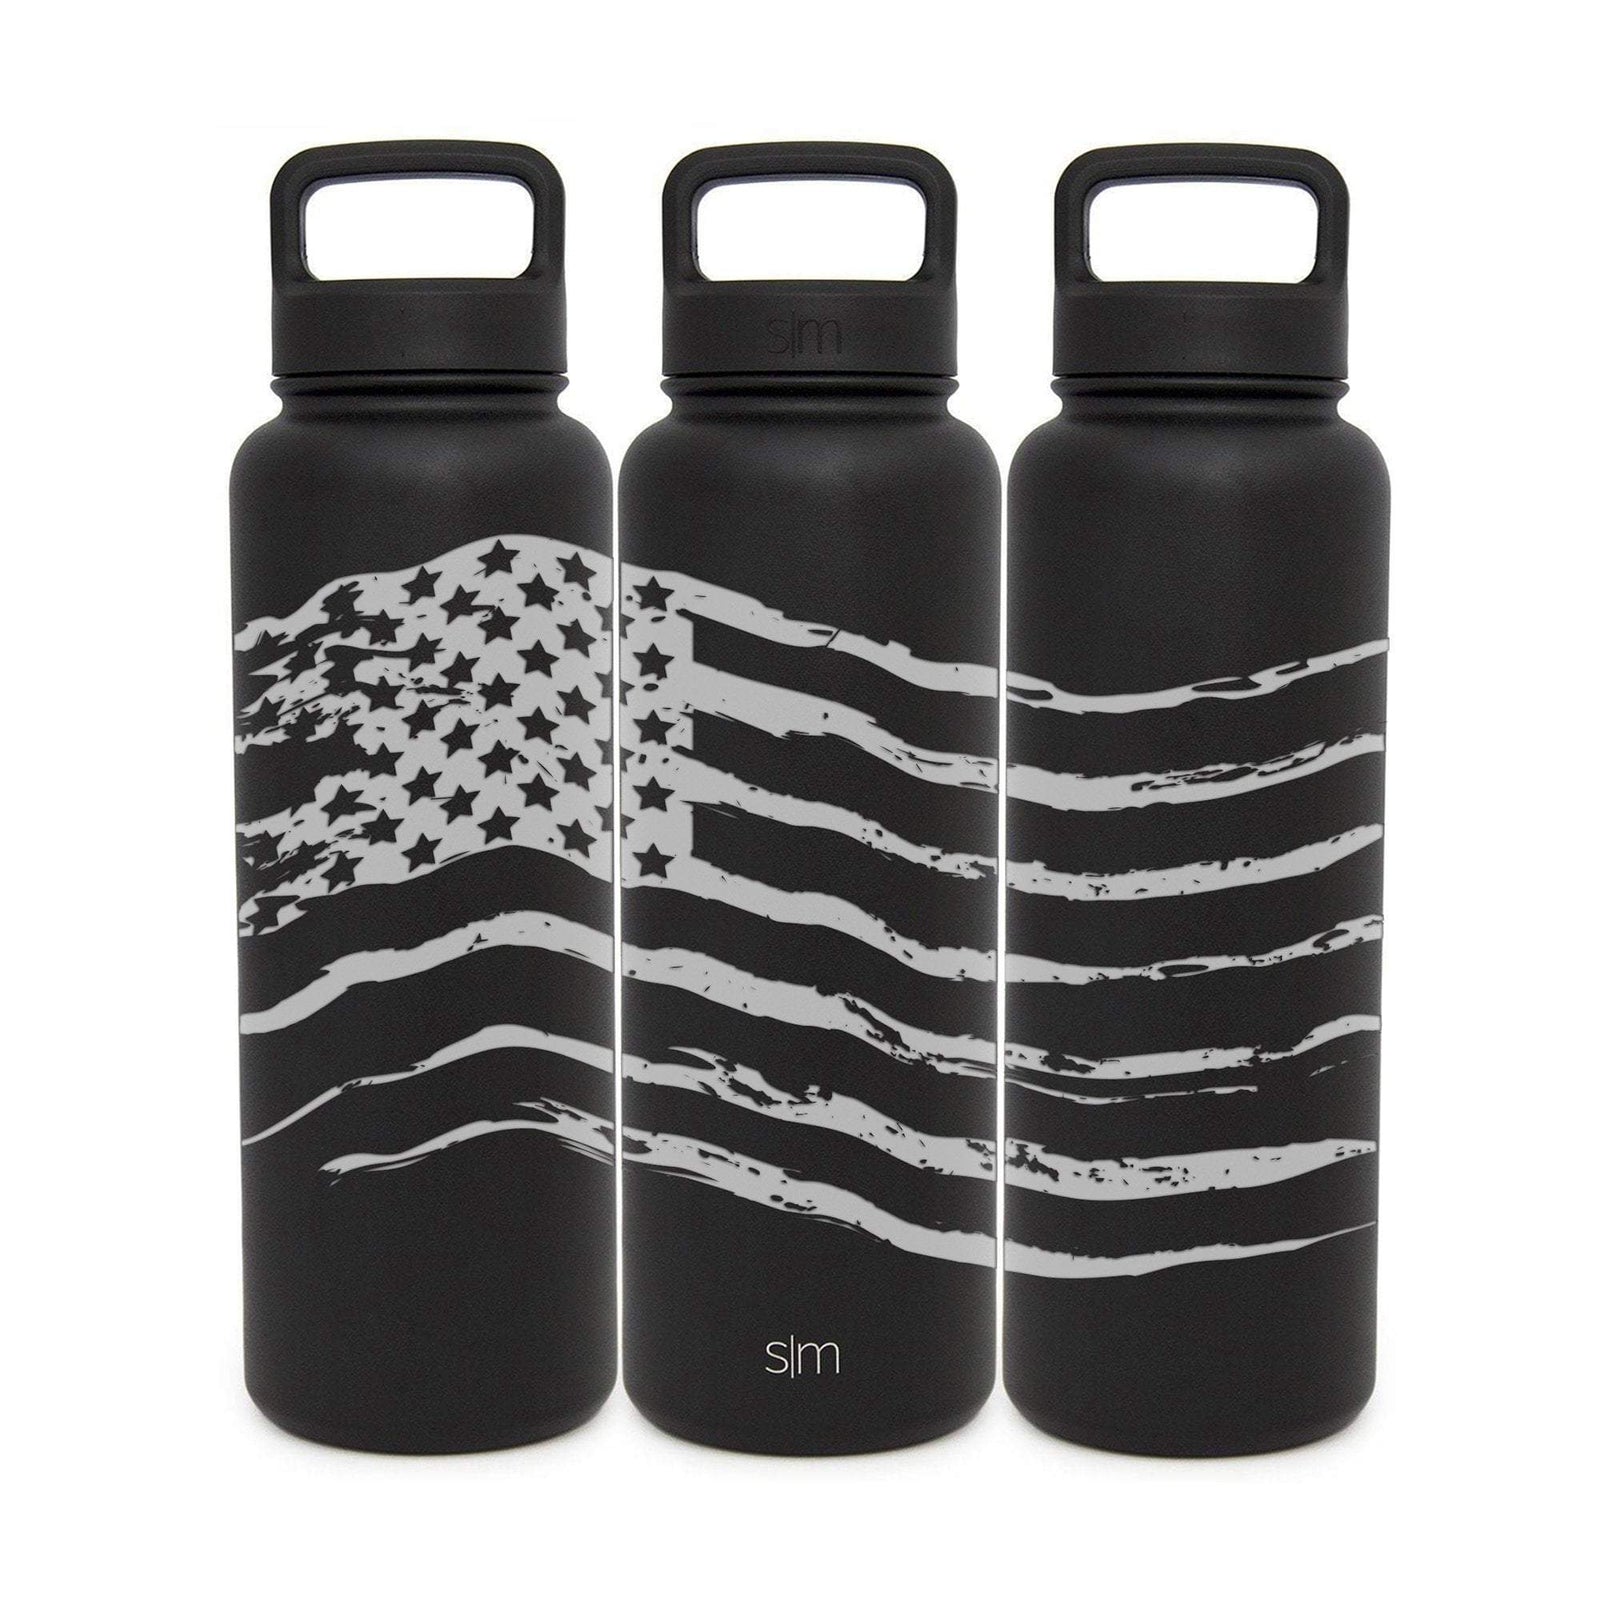 https://cdn.shopify.com/s/files/1/1400/5987/products/full-360-all-american-flag-stainless-steel-40-oz-midnight-black-water-bottle-with-extra-lid-by-leitlein-design-integrity-bottles-16114211061859_1600x.jpg?v=1601746122